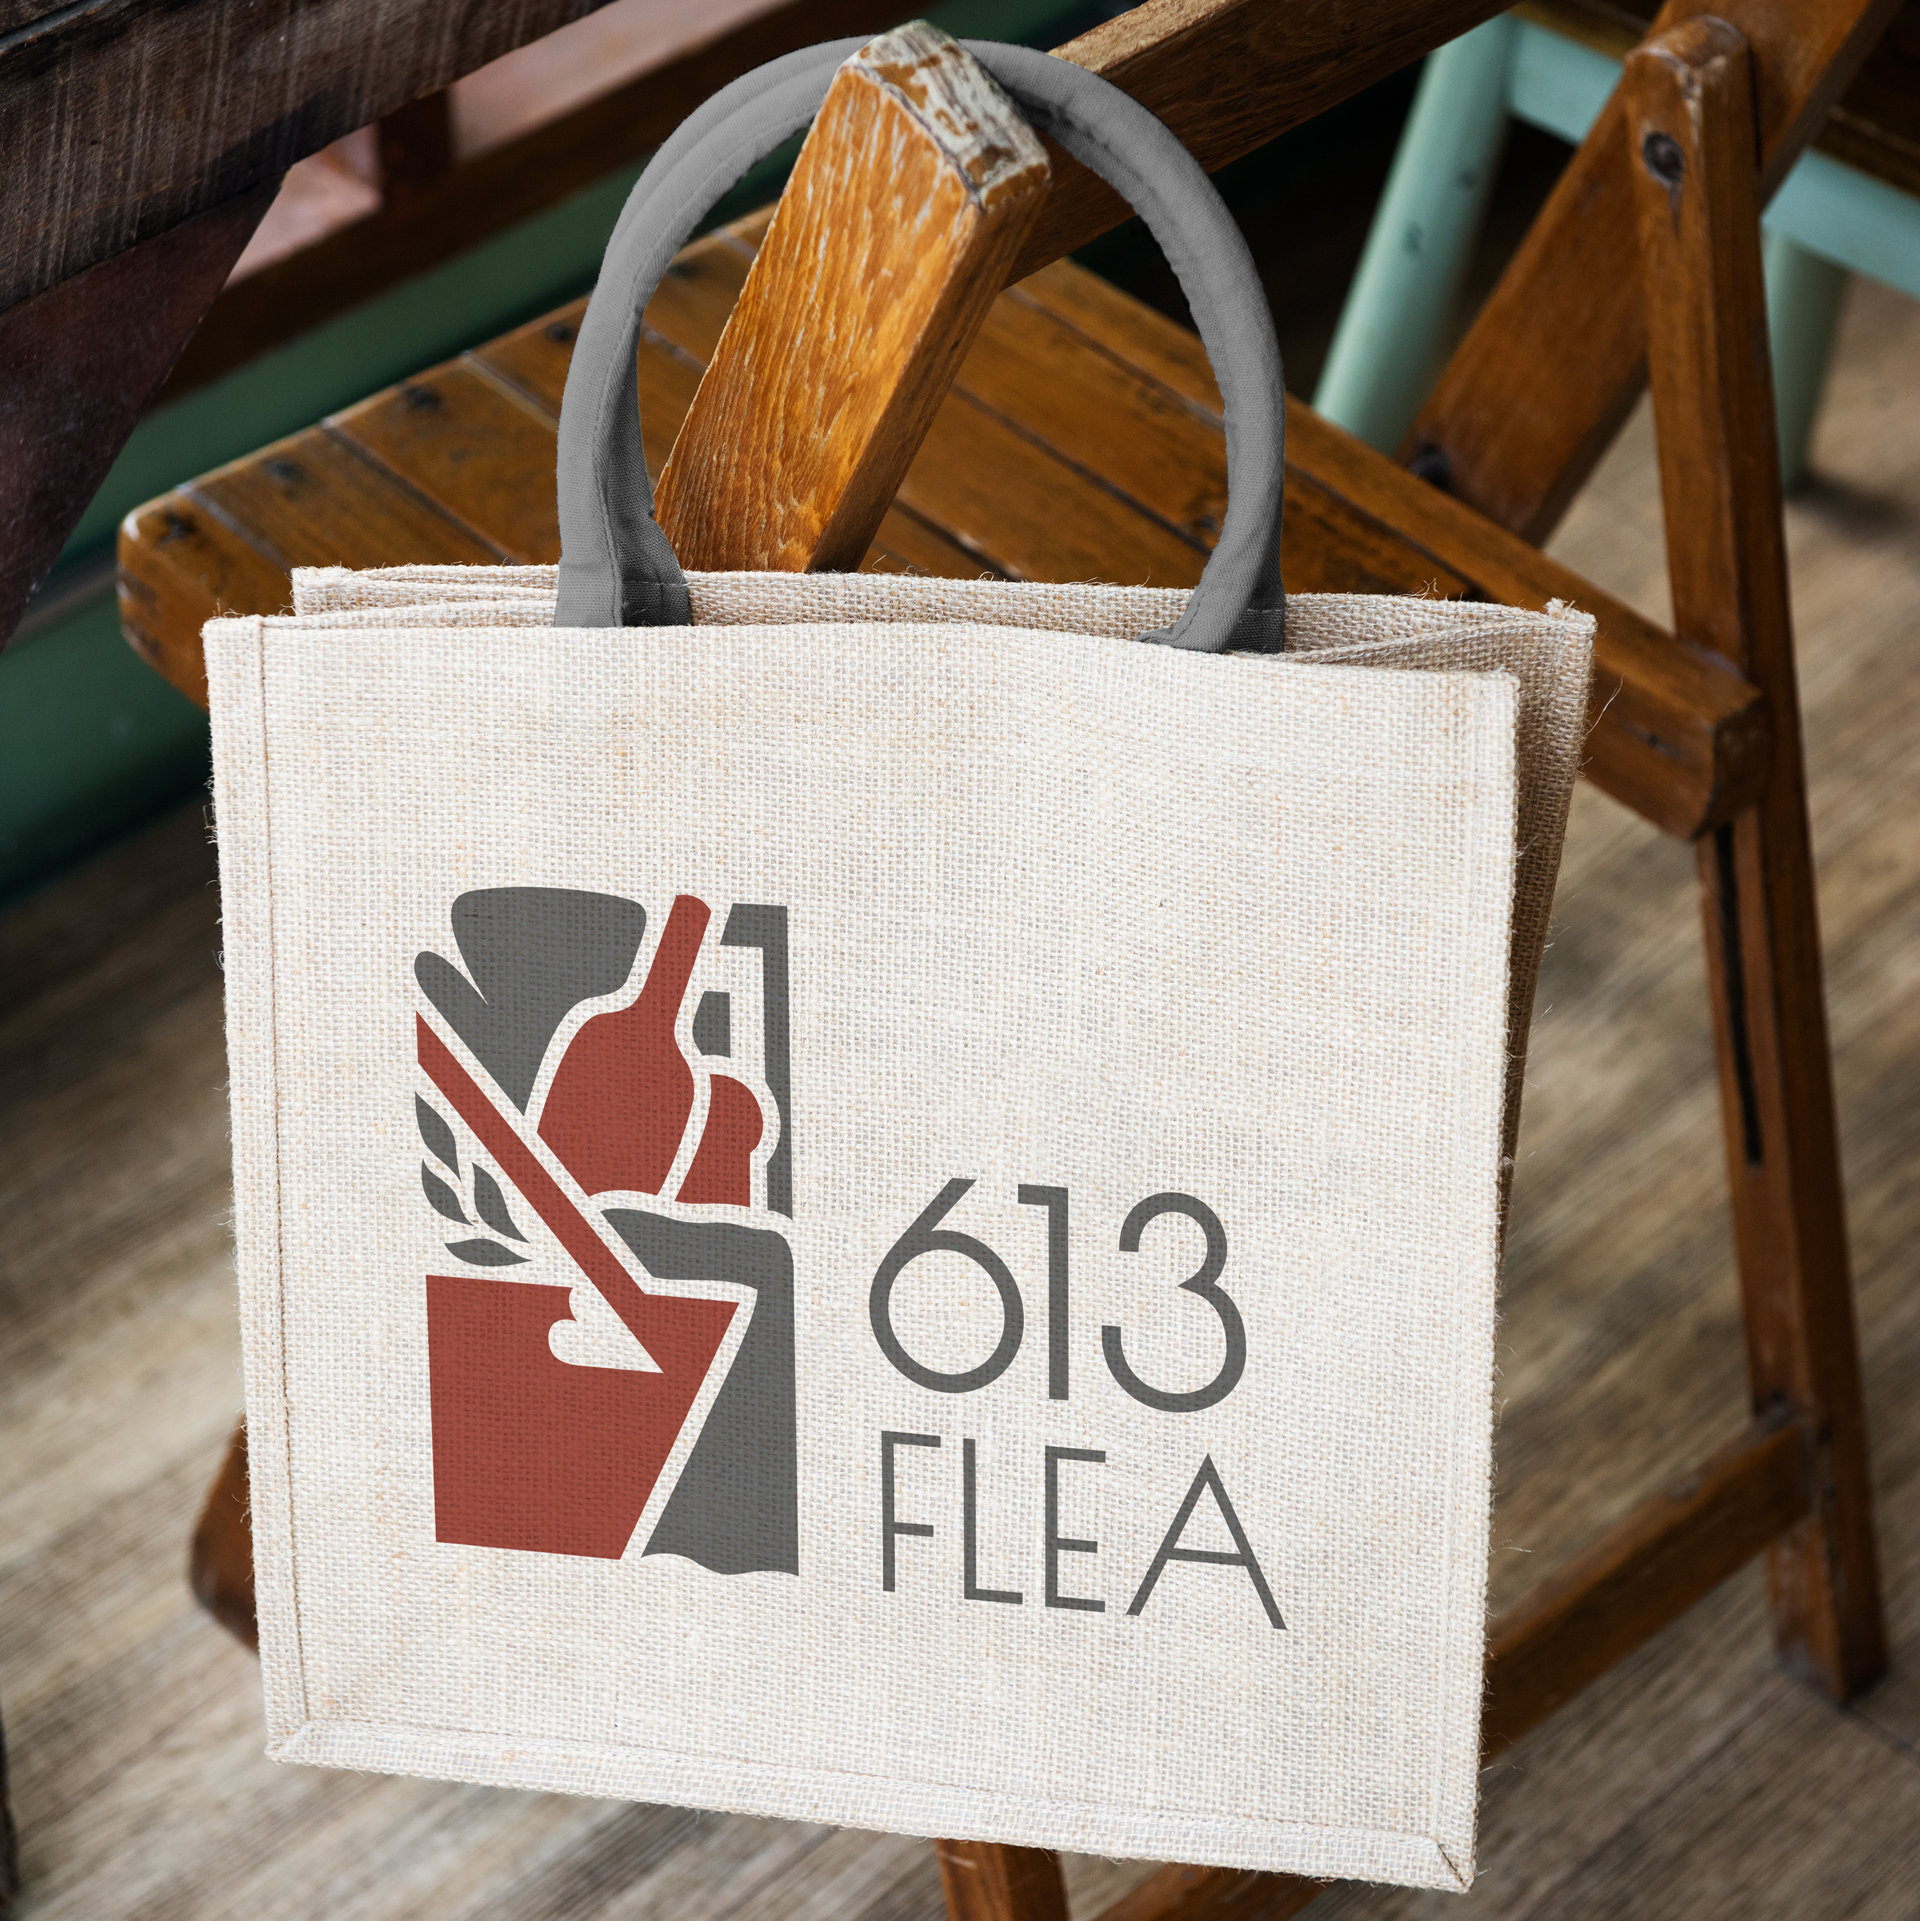 A wicker looking totebag with the logo on it, with a grey handle, hangs on a wooden slat chair.